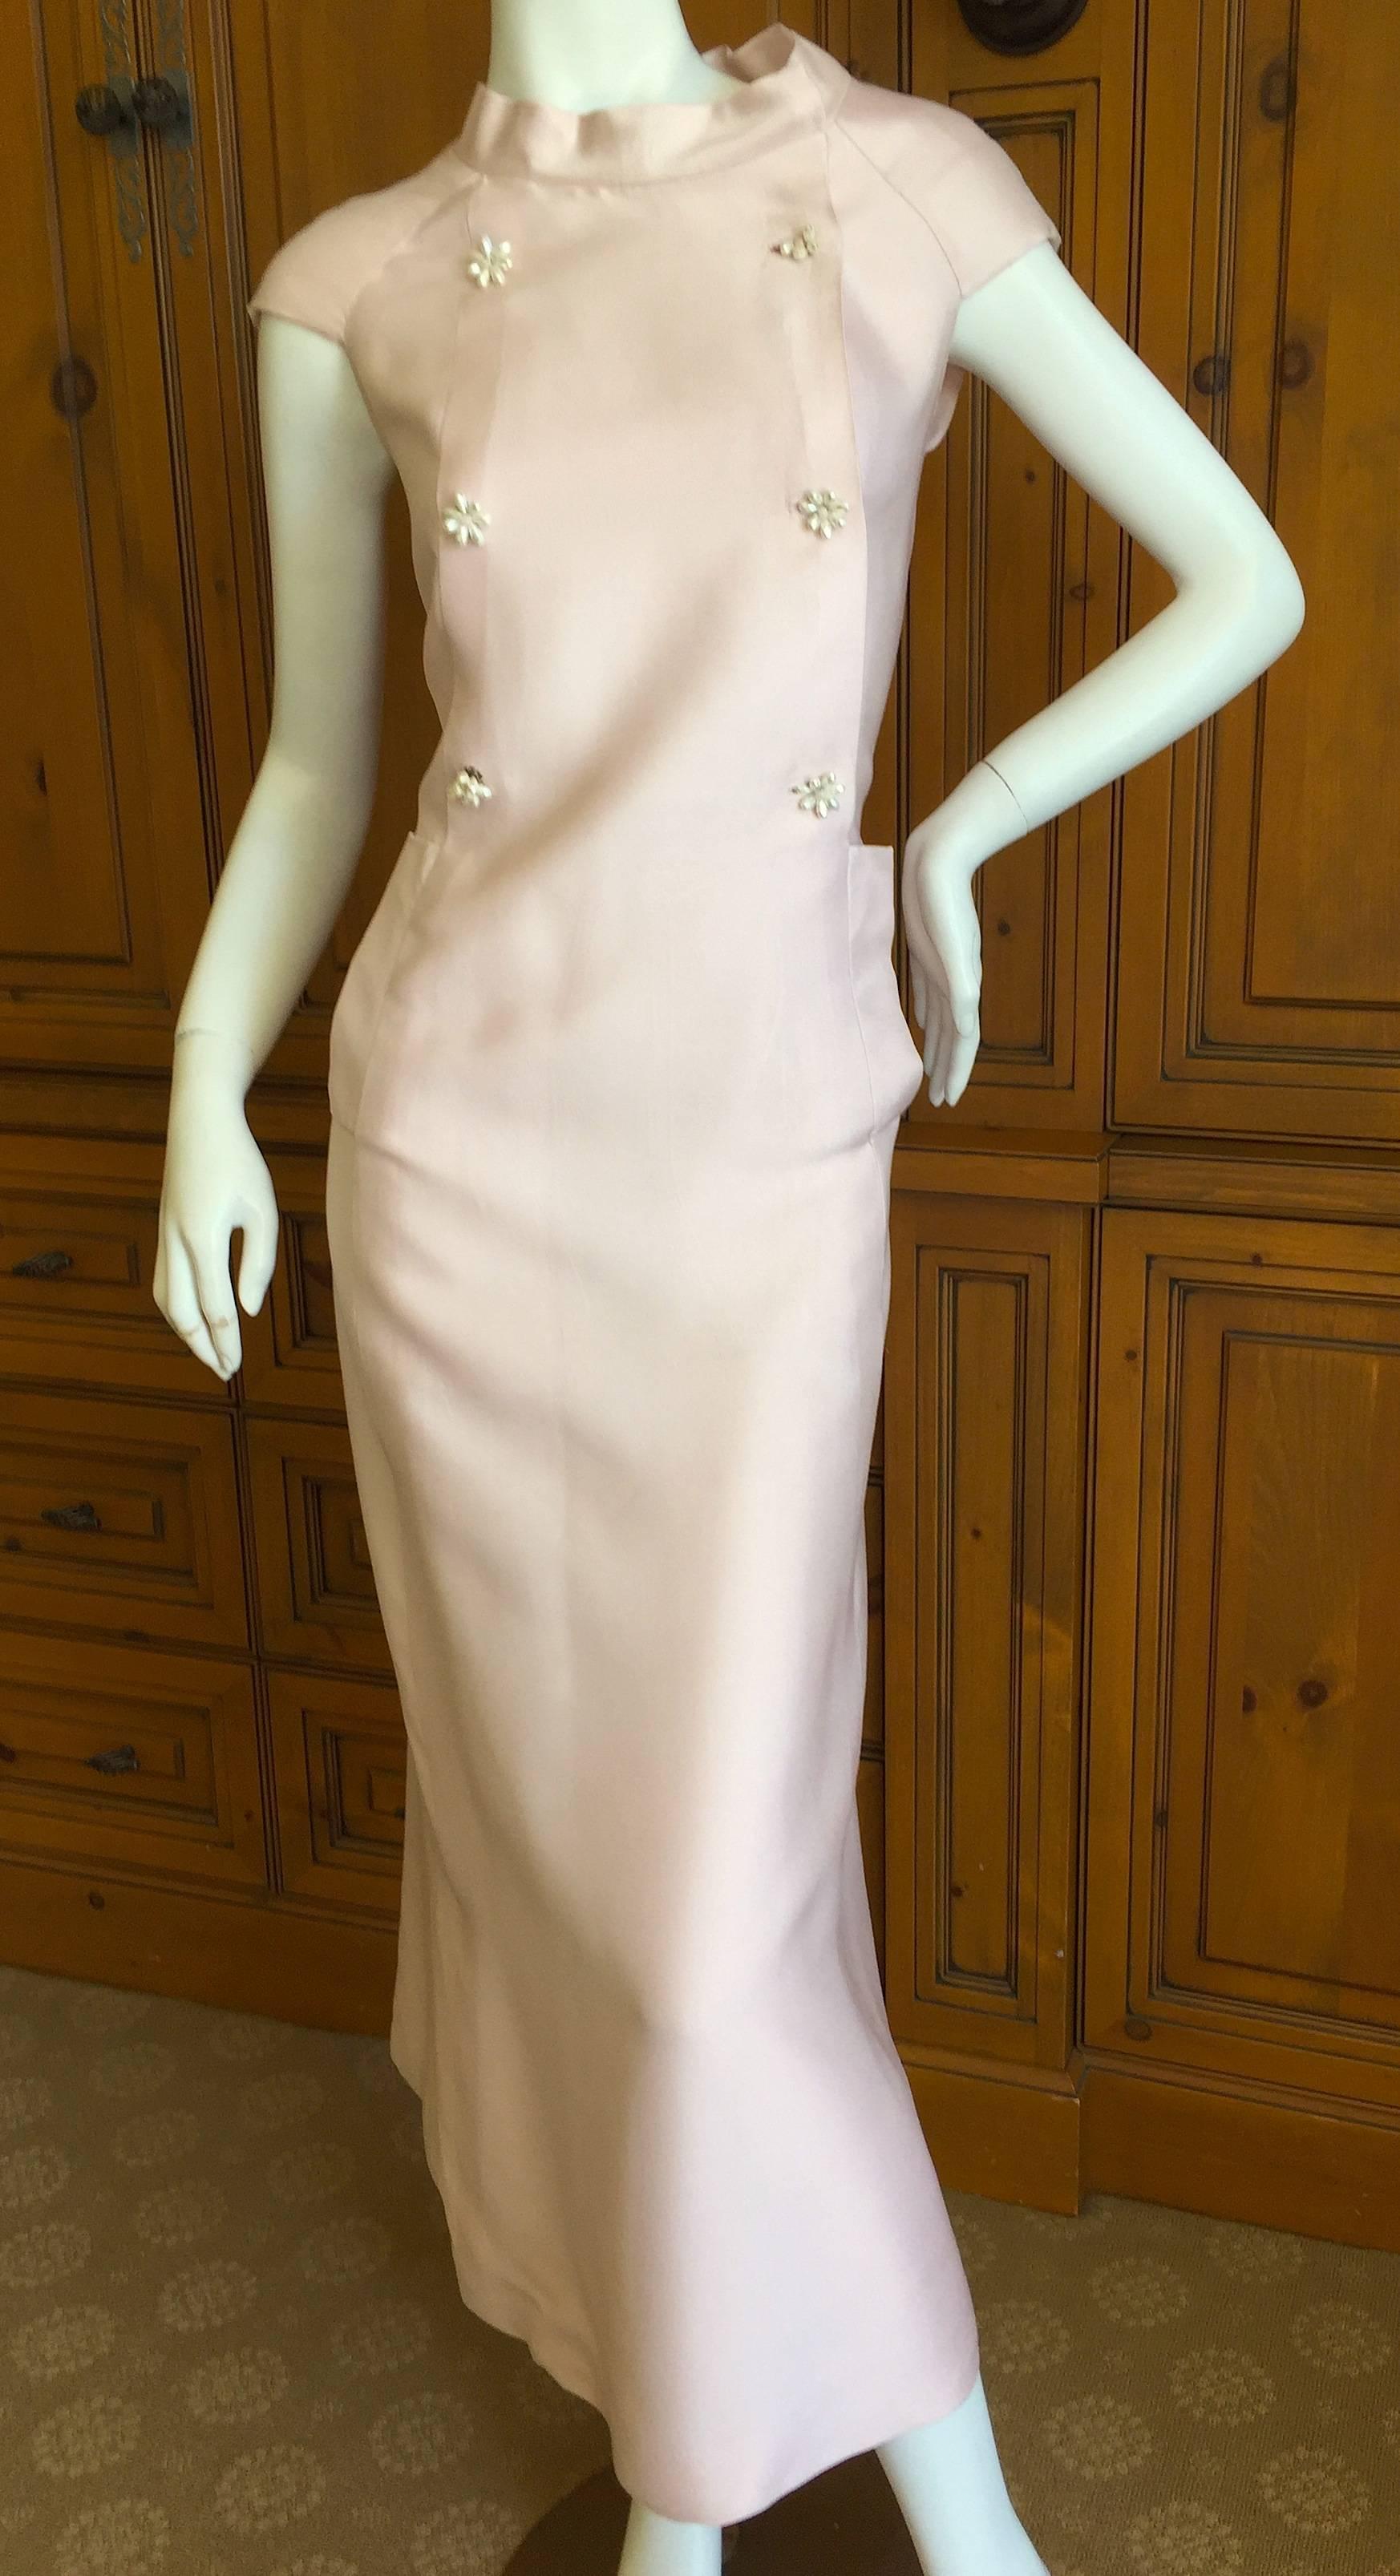 Beautiful pale pink silk twill dress from Christian Dior, circa 1960.
Numbered tag, this is from the Couture, appx circa 1960.
It is styled as a loose fitting shift dress, I have shown it with and without being clamped in the back to show how it